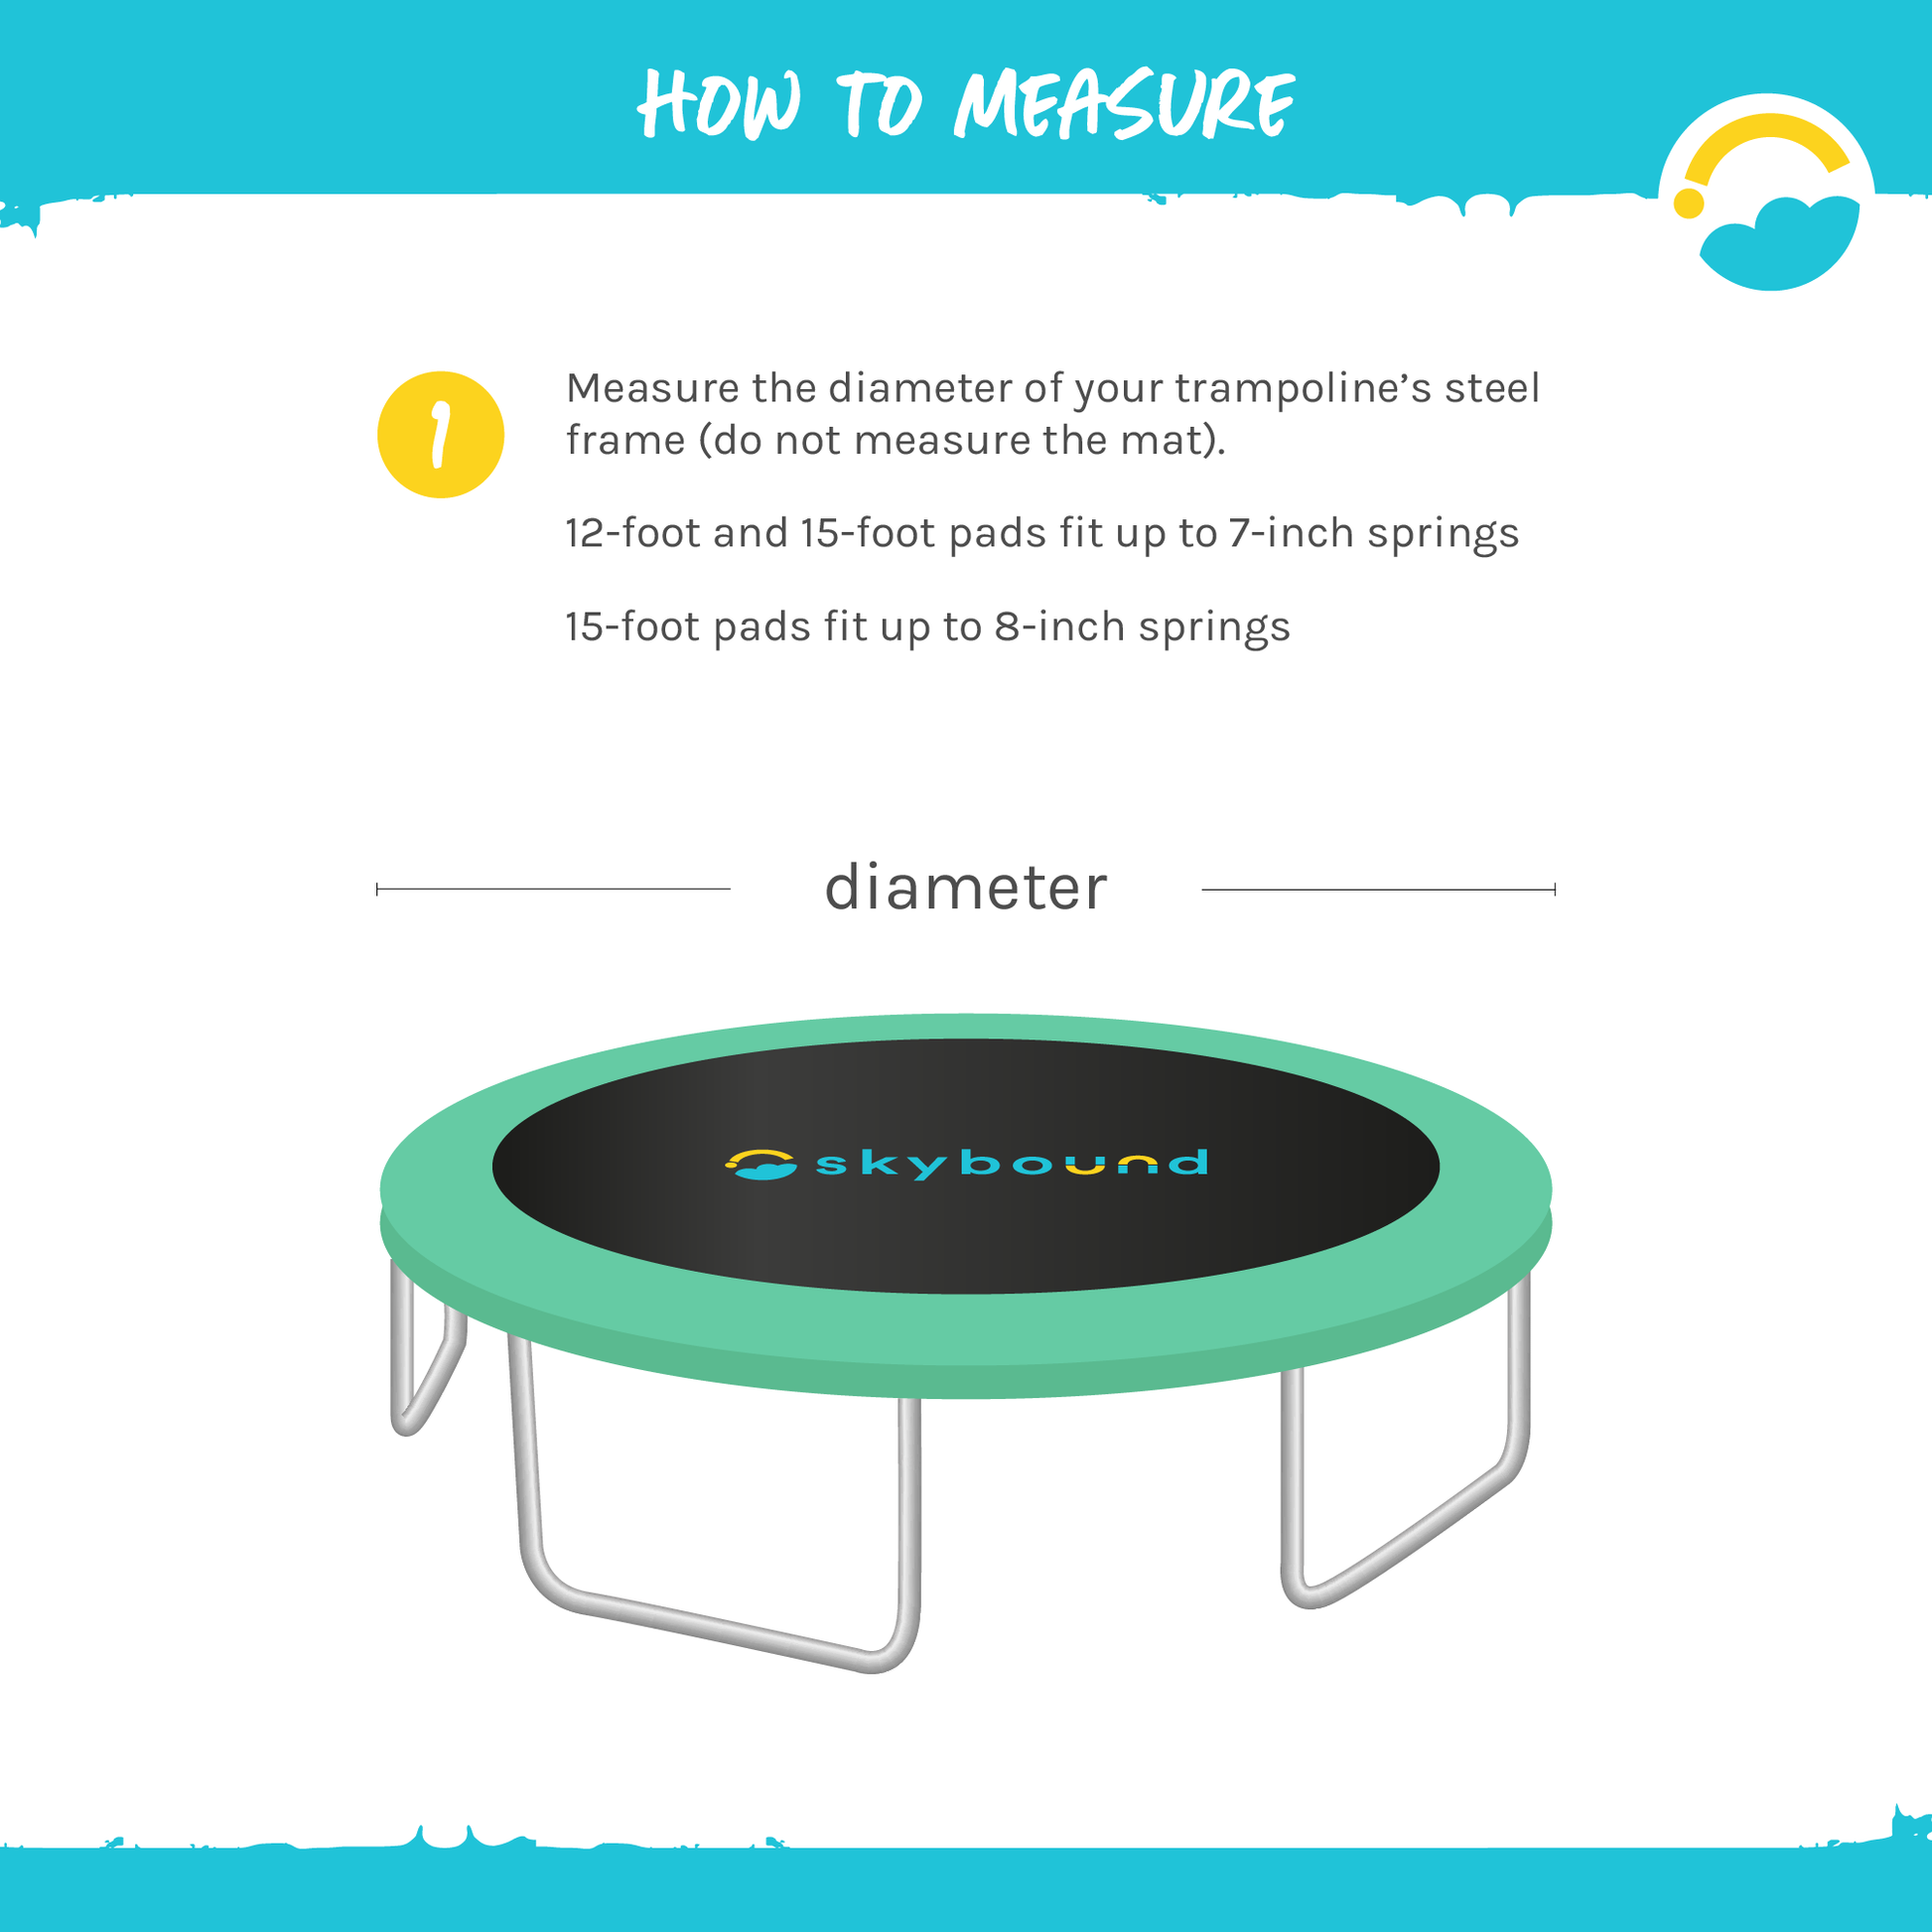 How to measure Trampoline Pad.  Measure the diameter of your trampoline's steel frame (do not measure the mat), 12-foot and 15 foot pads fit up to 7-inch springs, 15-food pads fit up to 8-inch springs.  